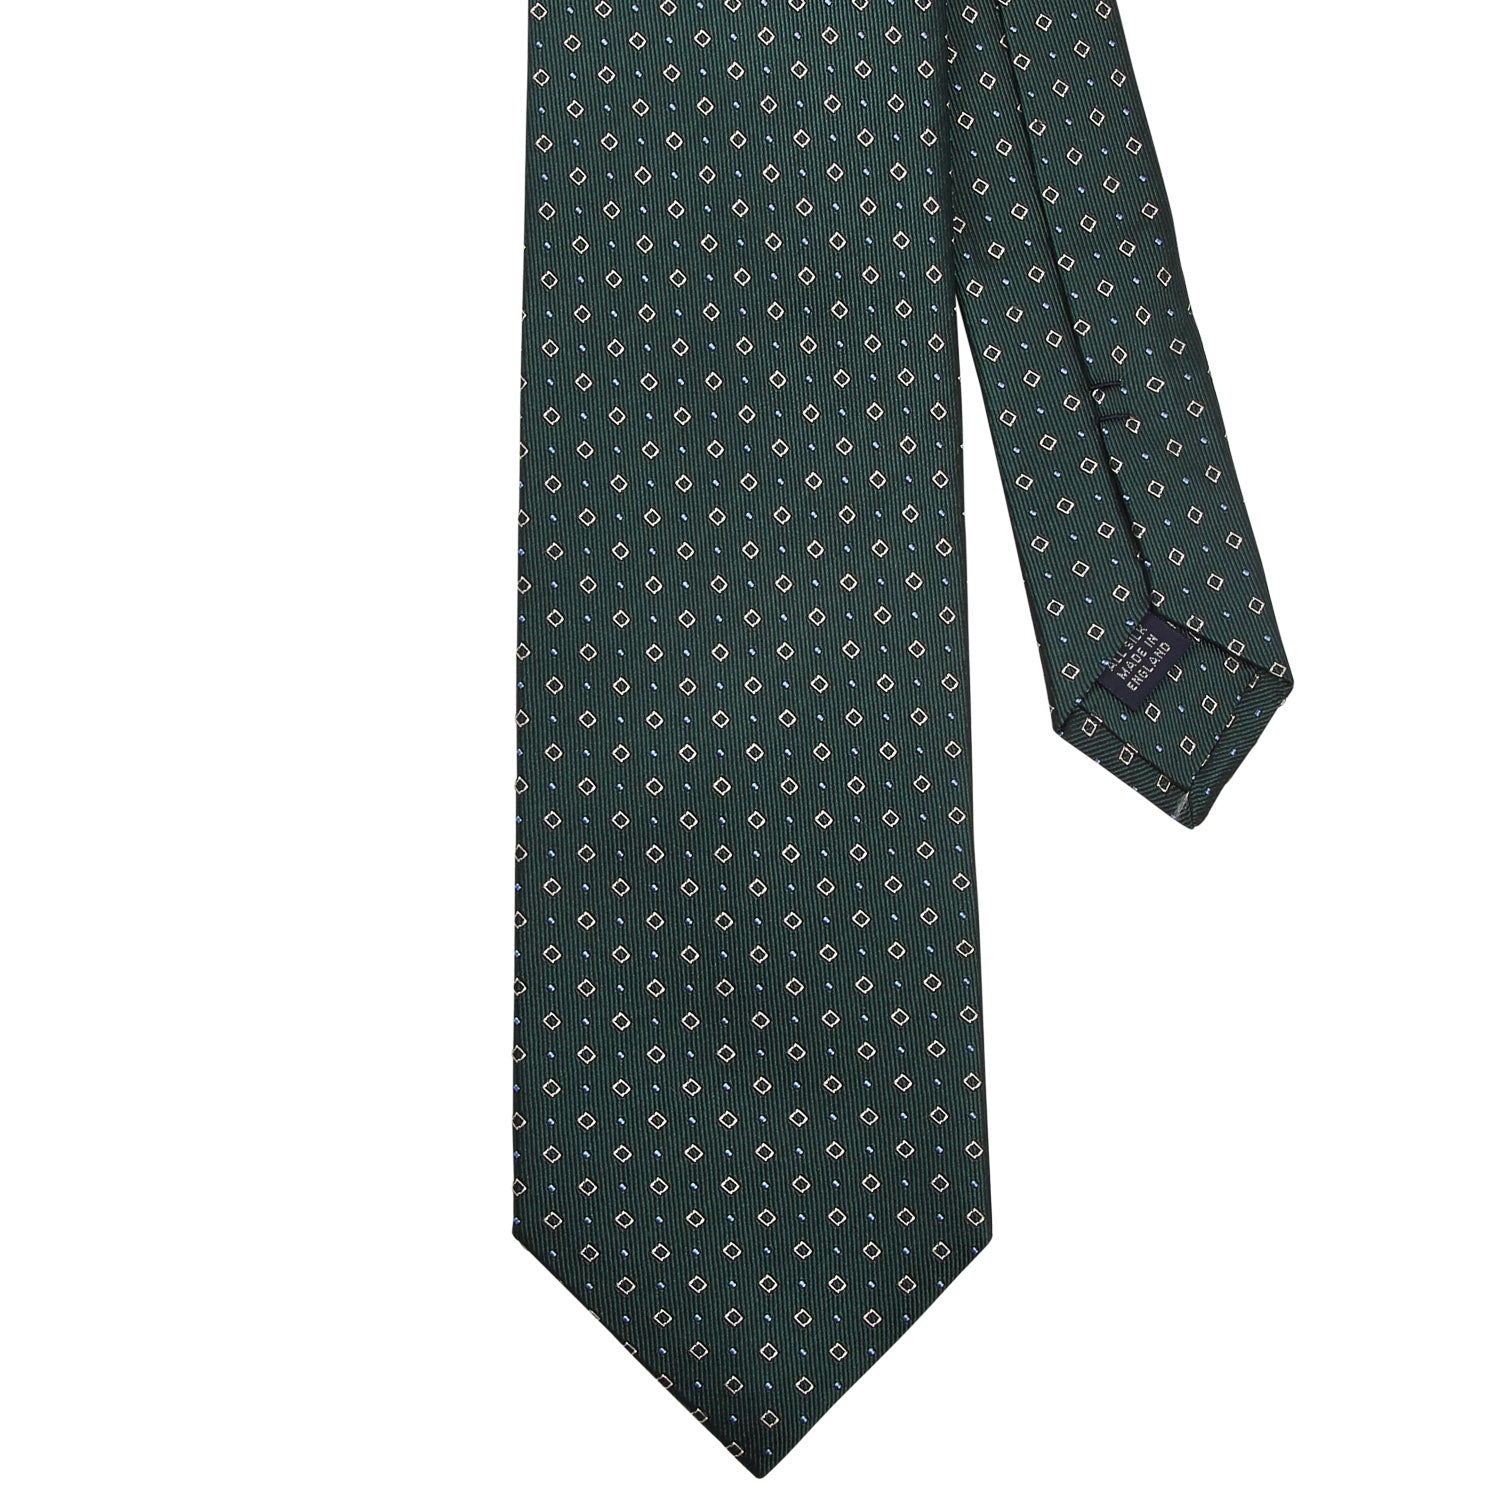 A handmade Sovereign Grade Forest Green Alternating Square Dot Jacquard Tie from KirbyAllison.com in the United Kingdom, featuring a small polka dot pattern.